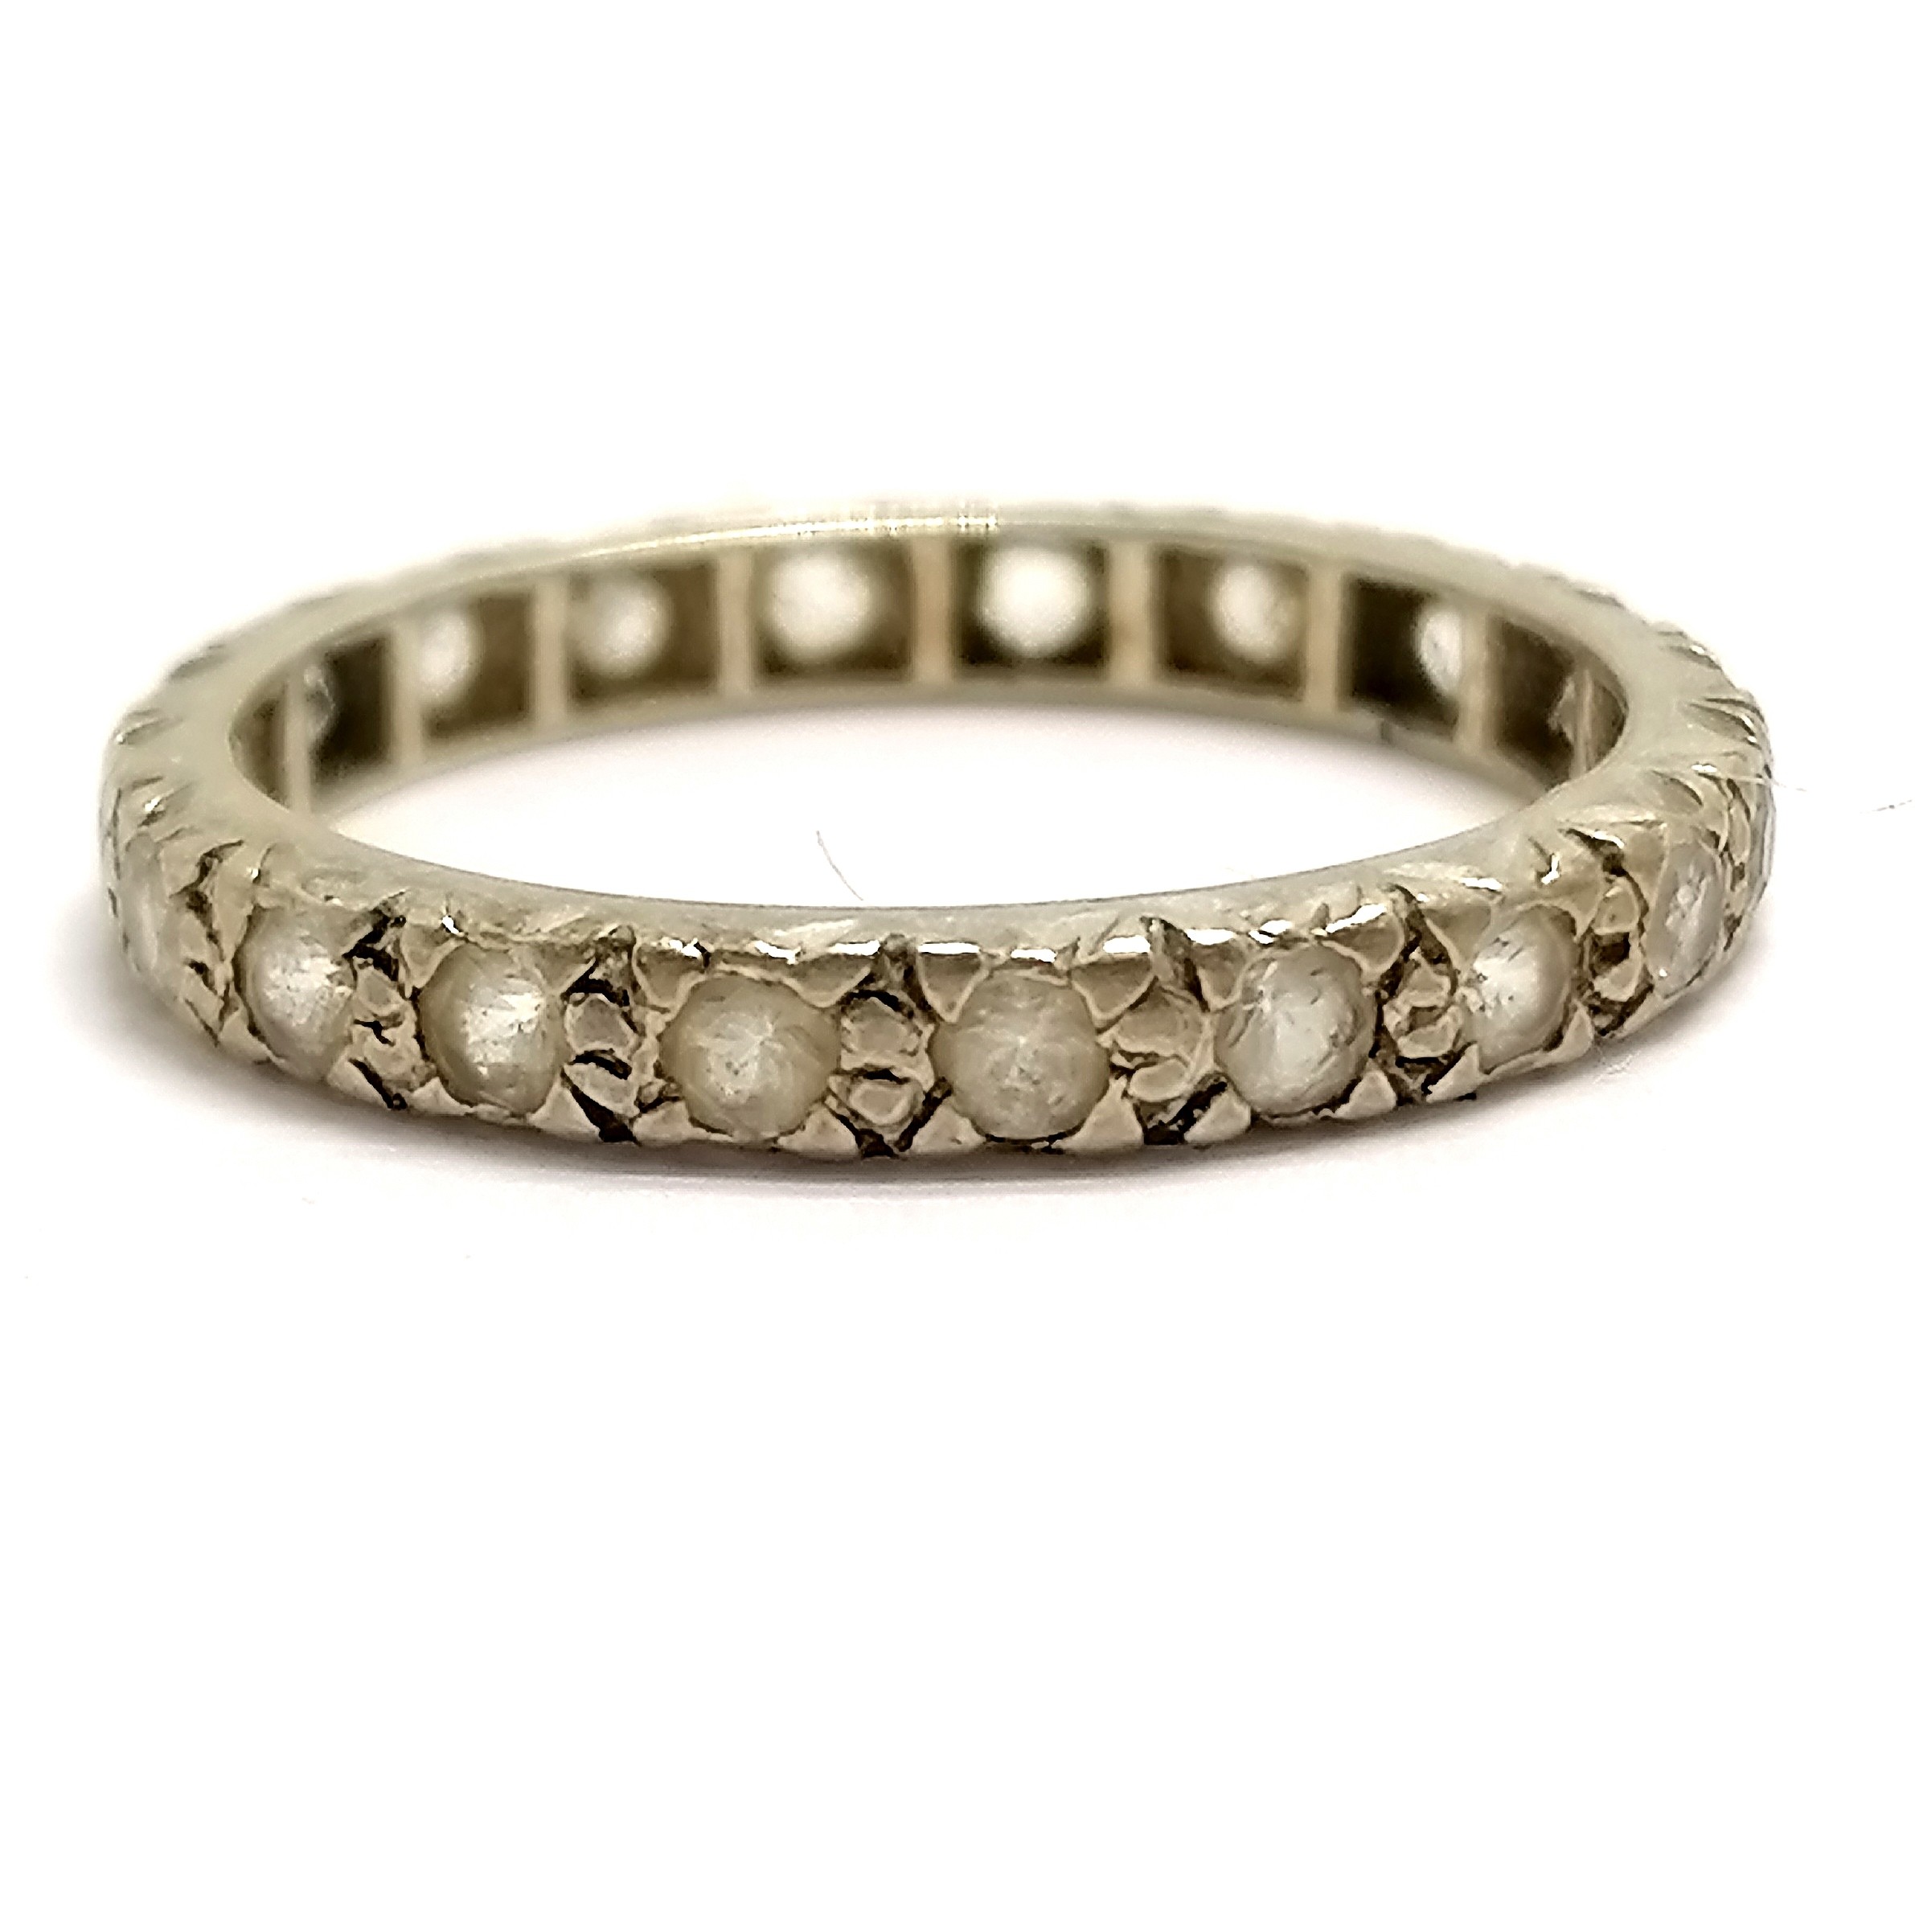 Unmarked white gold (touch tests as 14ct) white stone set eternity ring - size L½ & 1.7g total - Image 2 of 2